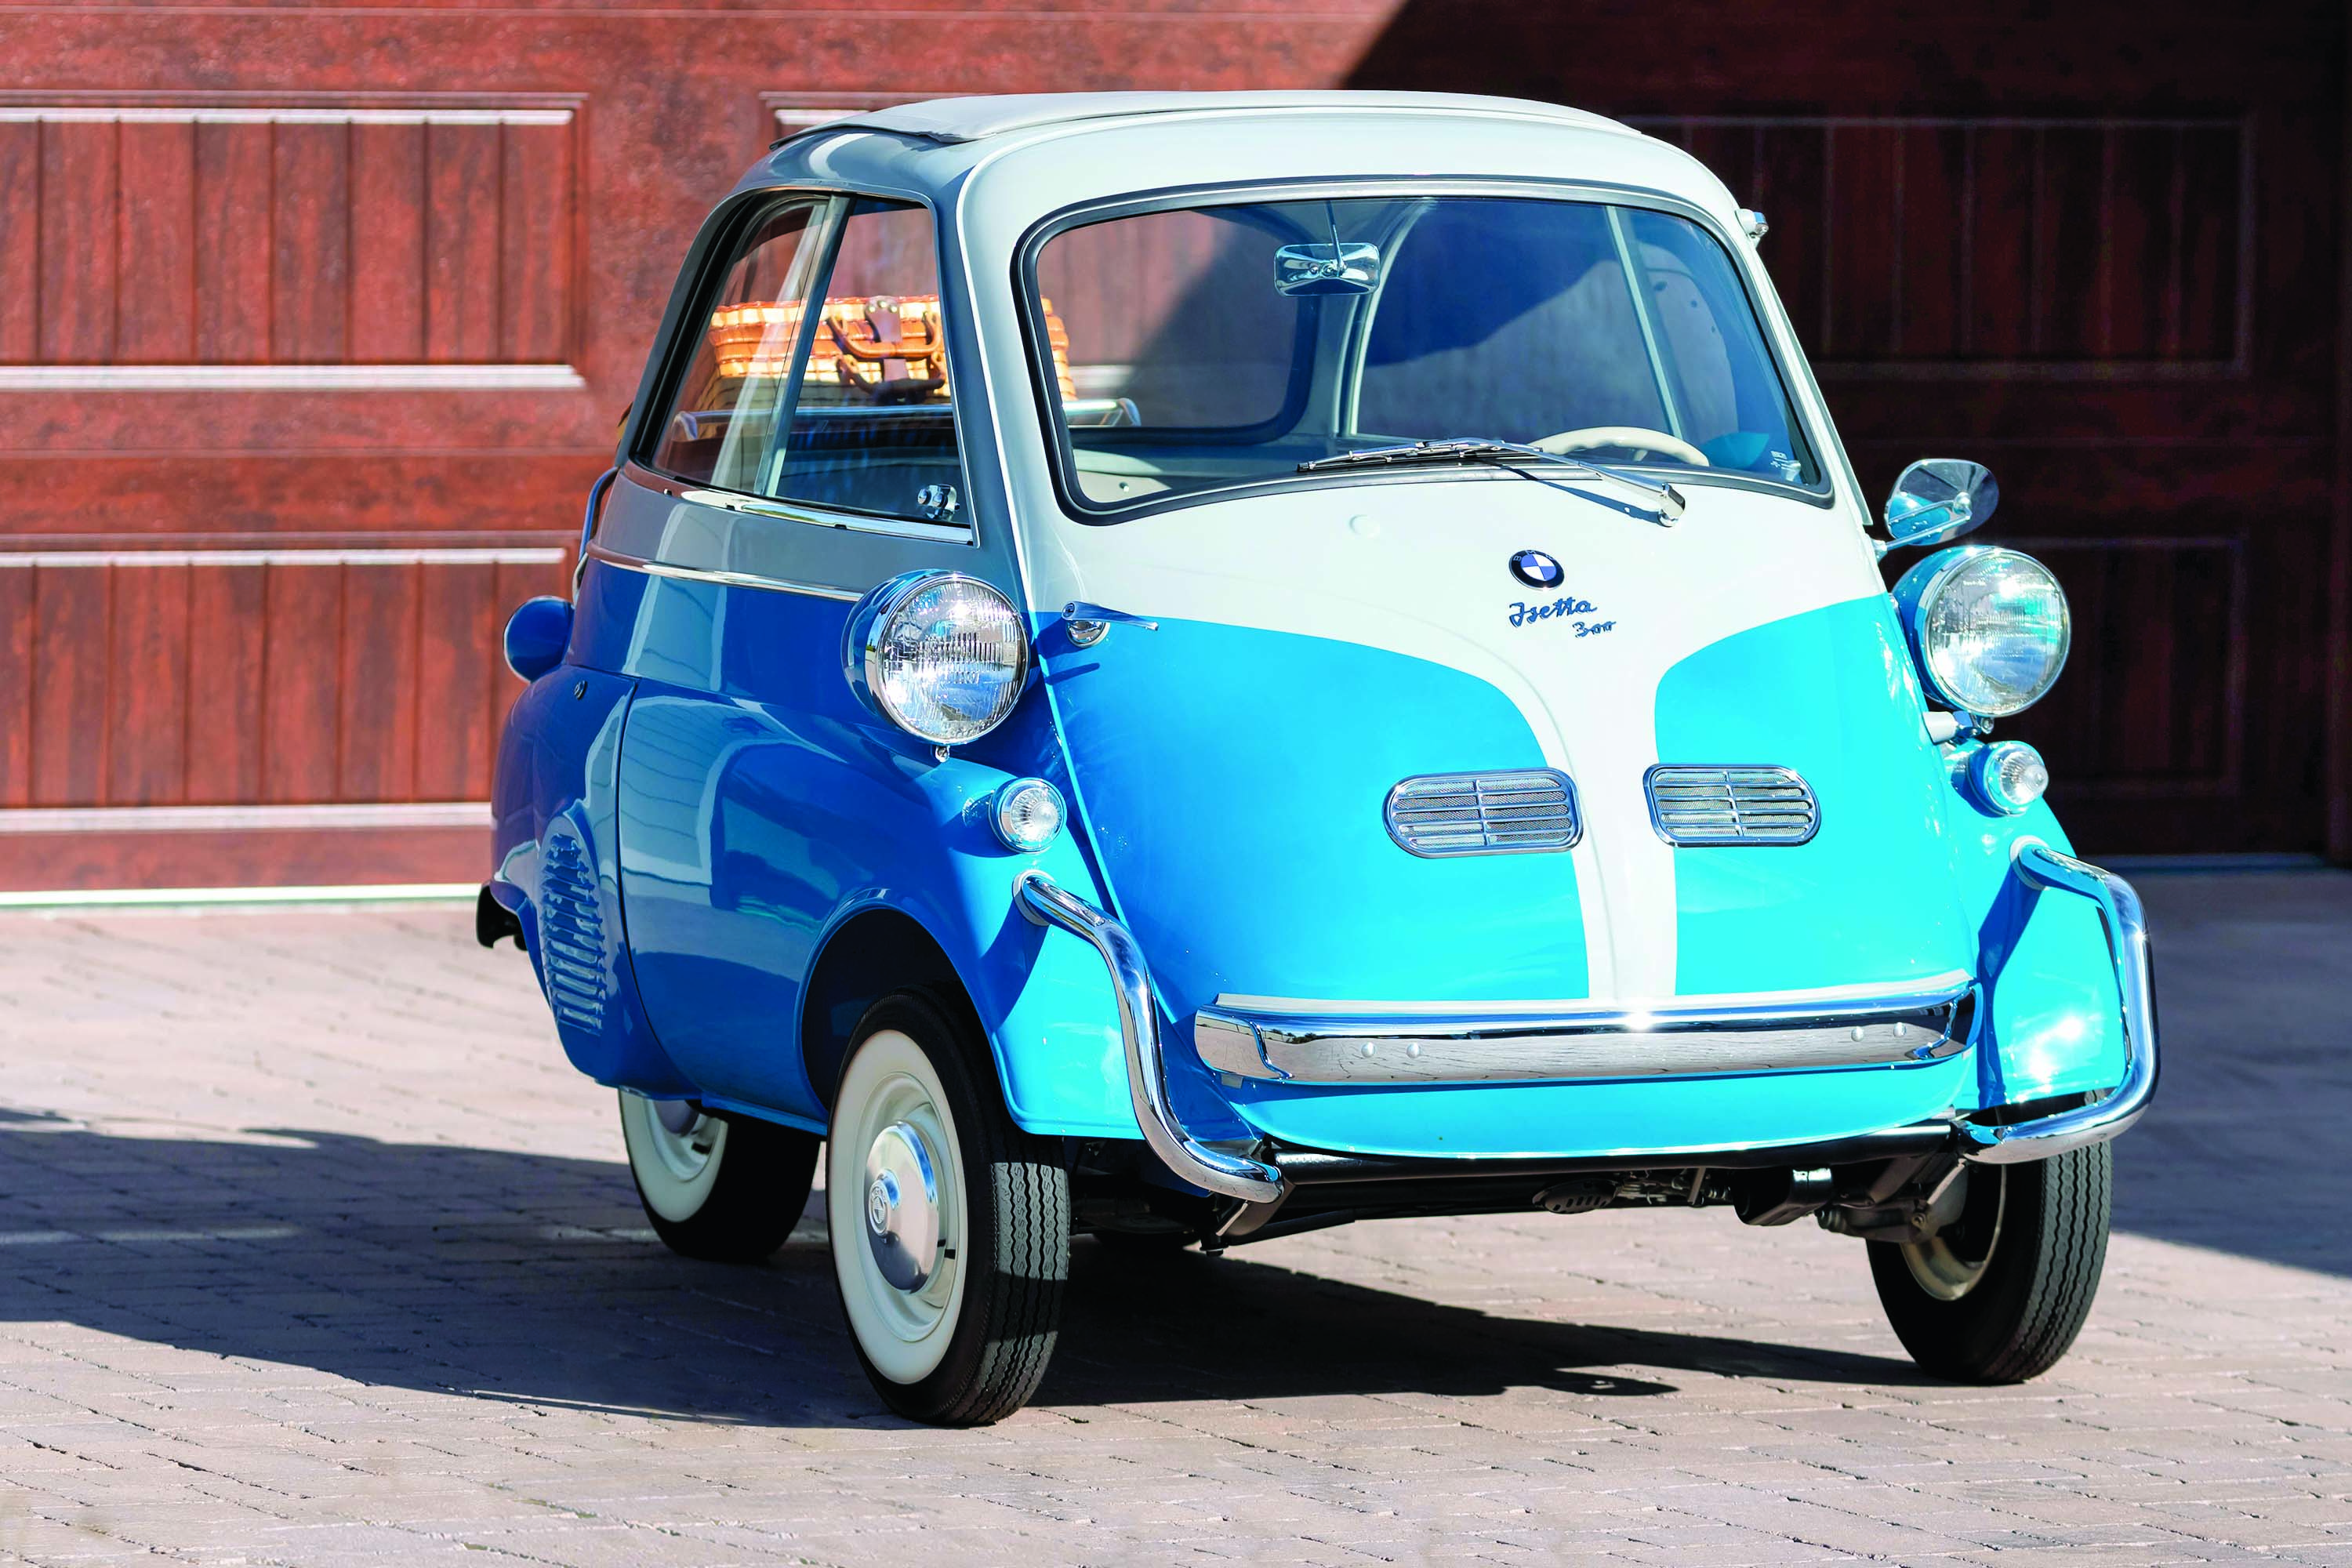 The BMW Isetta Casts A Big Shadow With Collectors